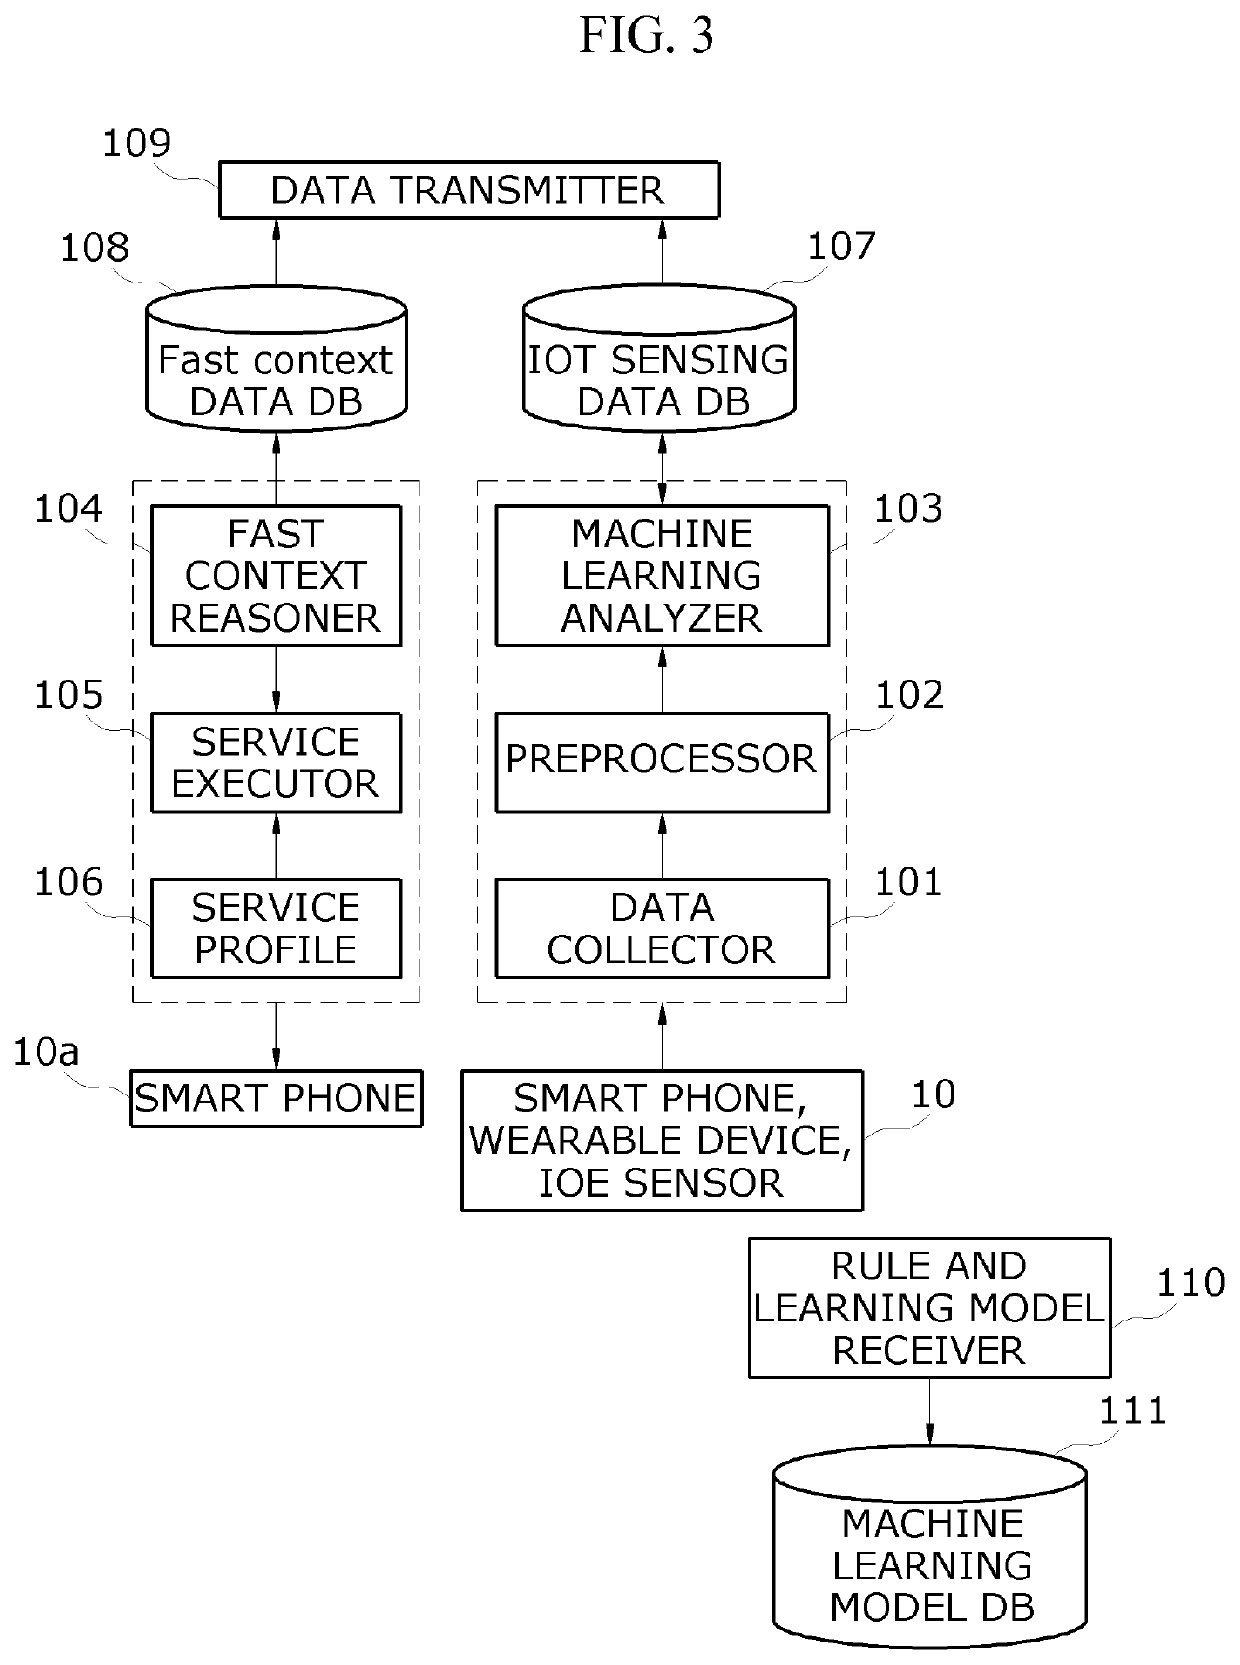 Apparatus and method for hierarchical context awareness and device autonomous configuration by real-time user behavior analysis